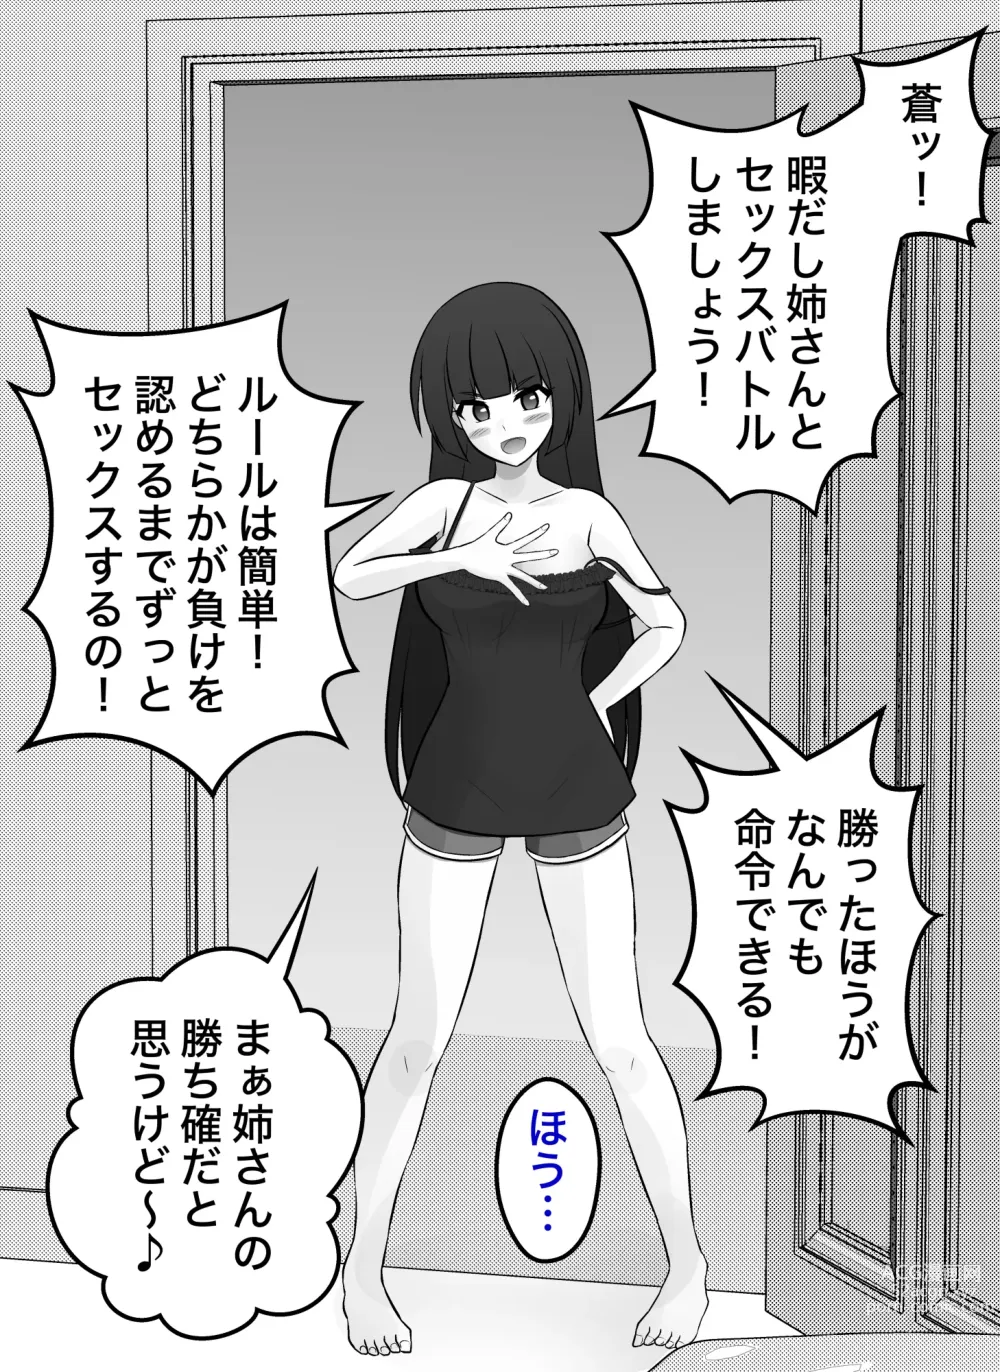 Page 13 of doujinshi A Parallel World With a 1:39 Male to Female Ratio Is Unexpectedly Normal